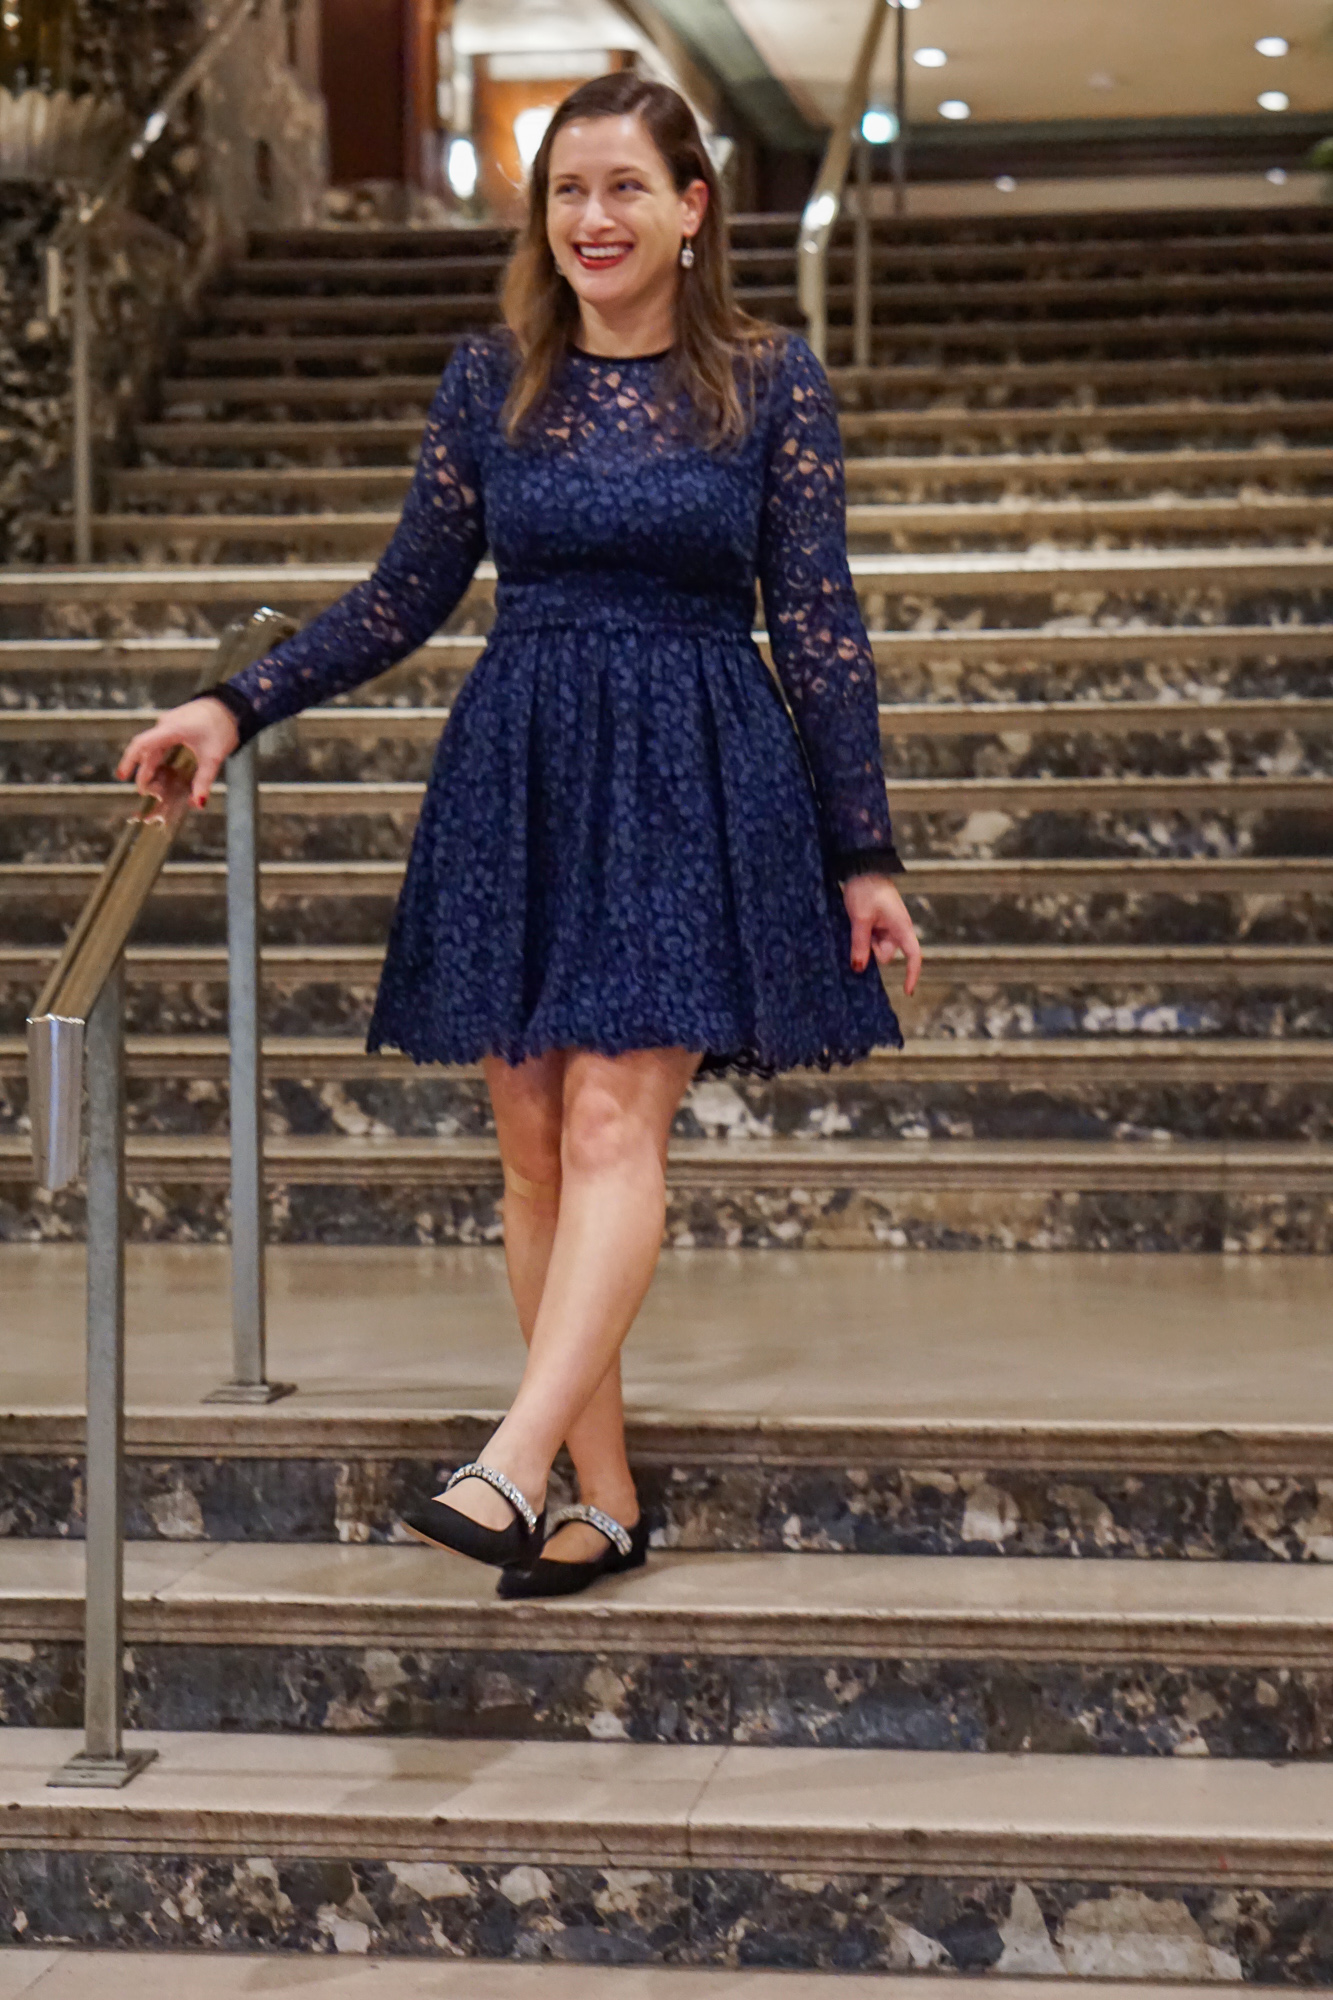 Playful in a long sleeve lace dress